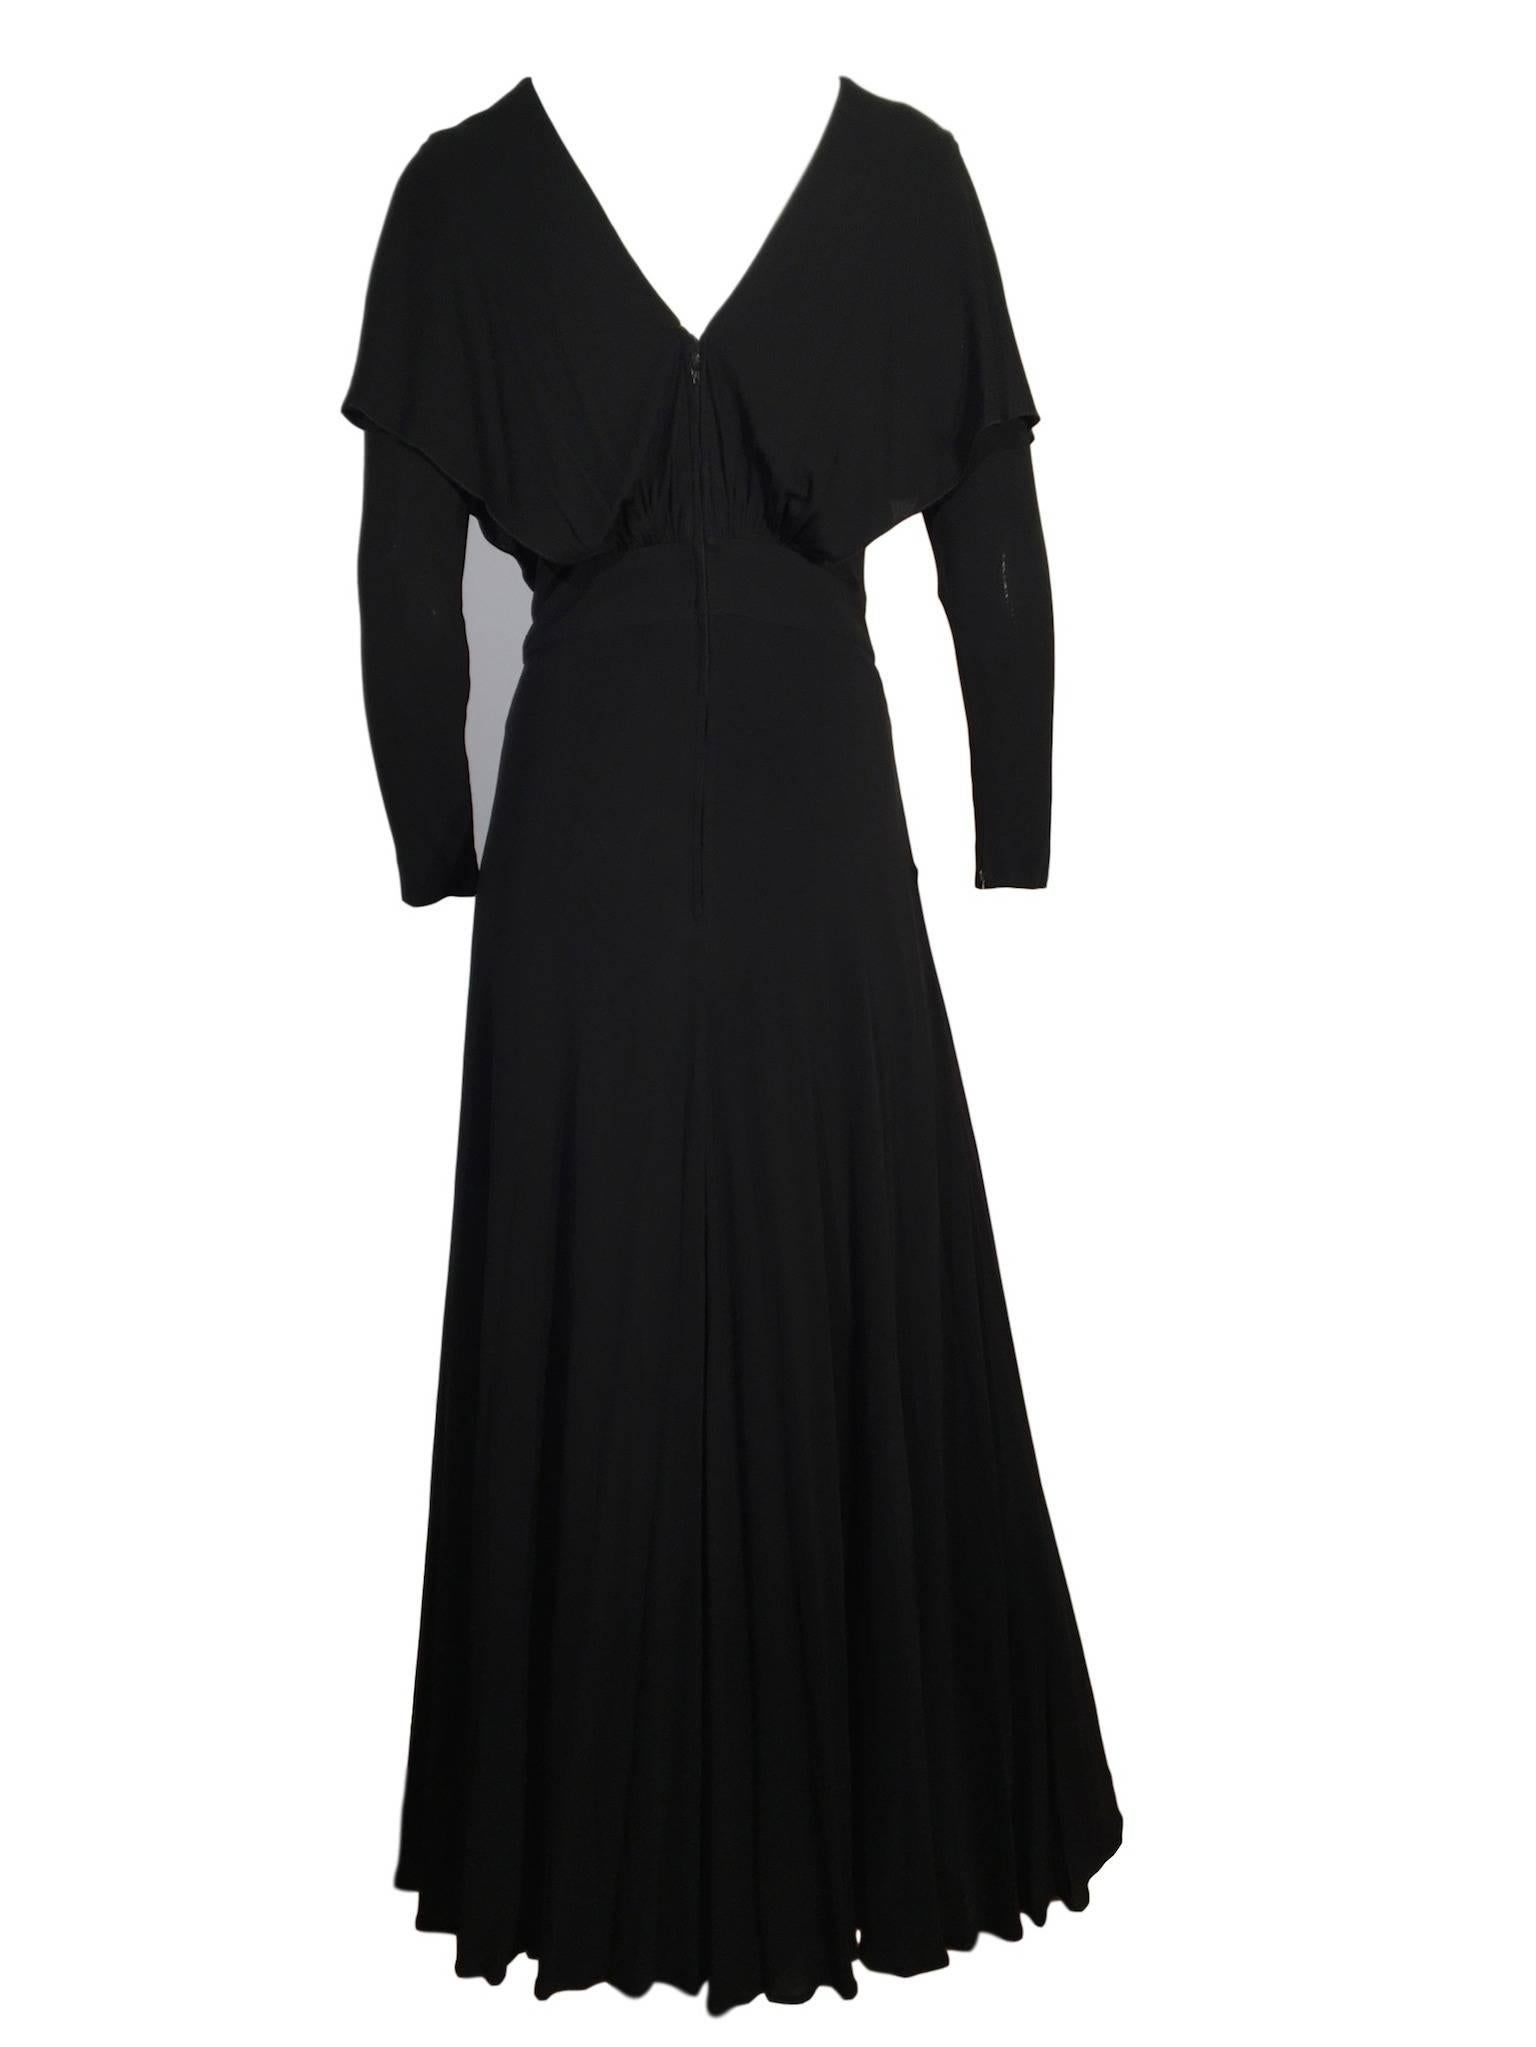 Black silk jersey full length evening dress, from the 1960s/70s era, with long fitted sleeves that fasten with a zip, gathered feature and layered detail on bodice and long sweeping skirt, fastens at the back with a zip and is lined with a satin